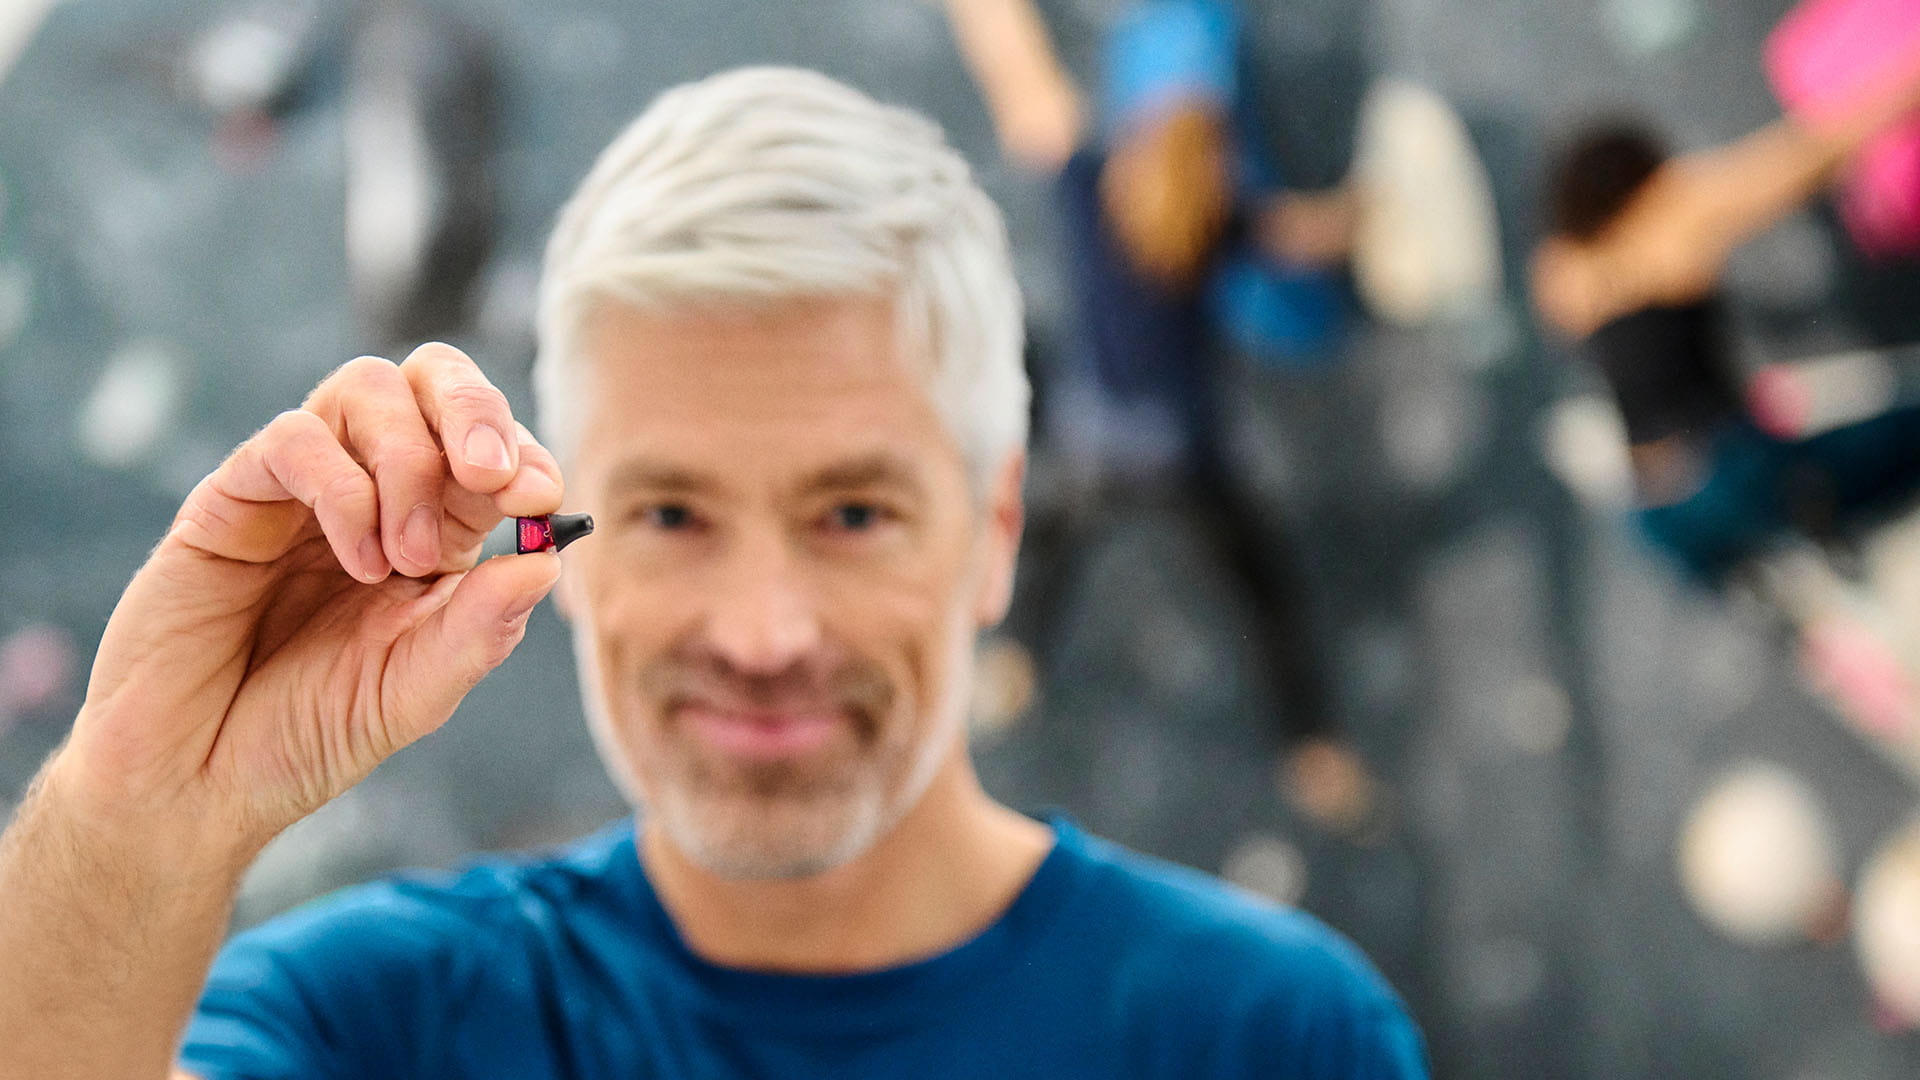 Man in bouldering hall holding Silk Charge&Go IX hearing aid